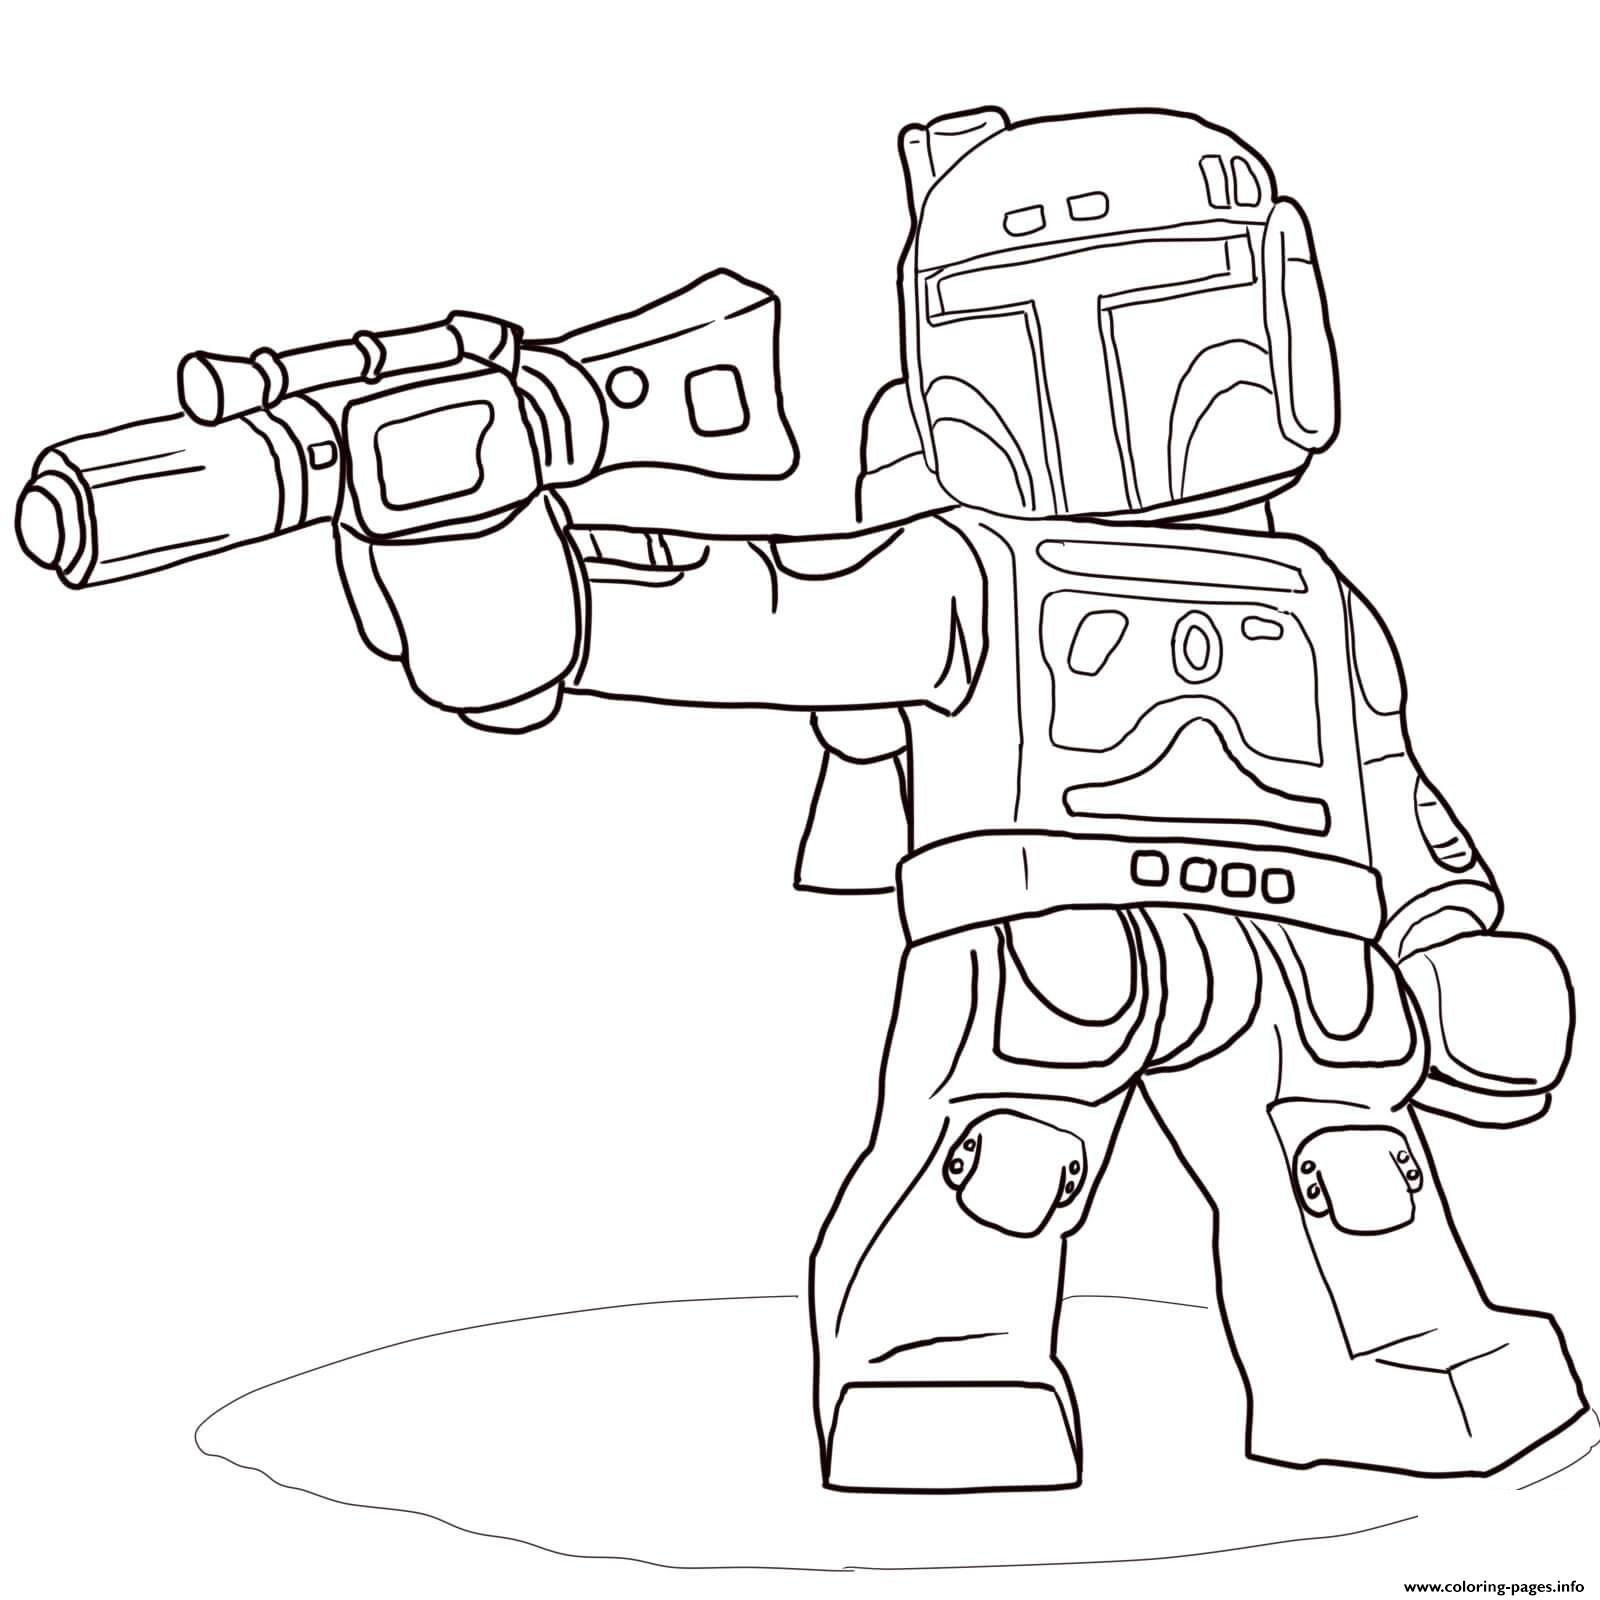 Lego Star Wars Boba Fett coloring pages